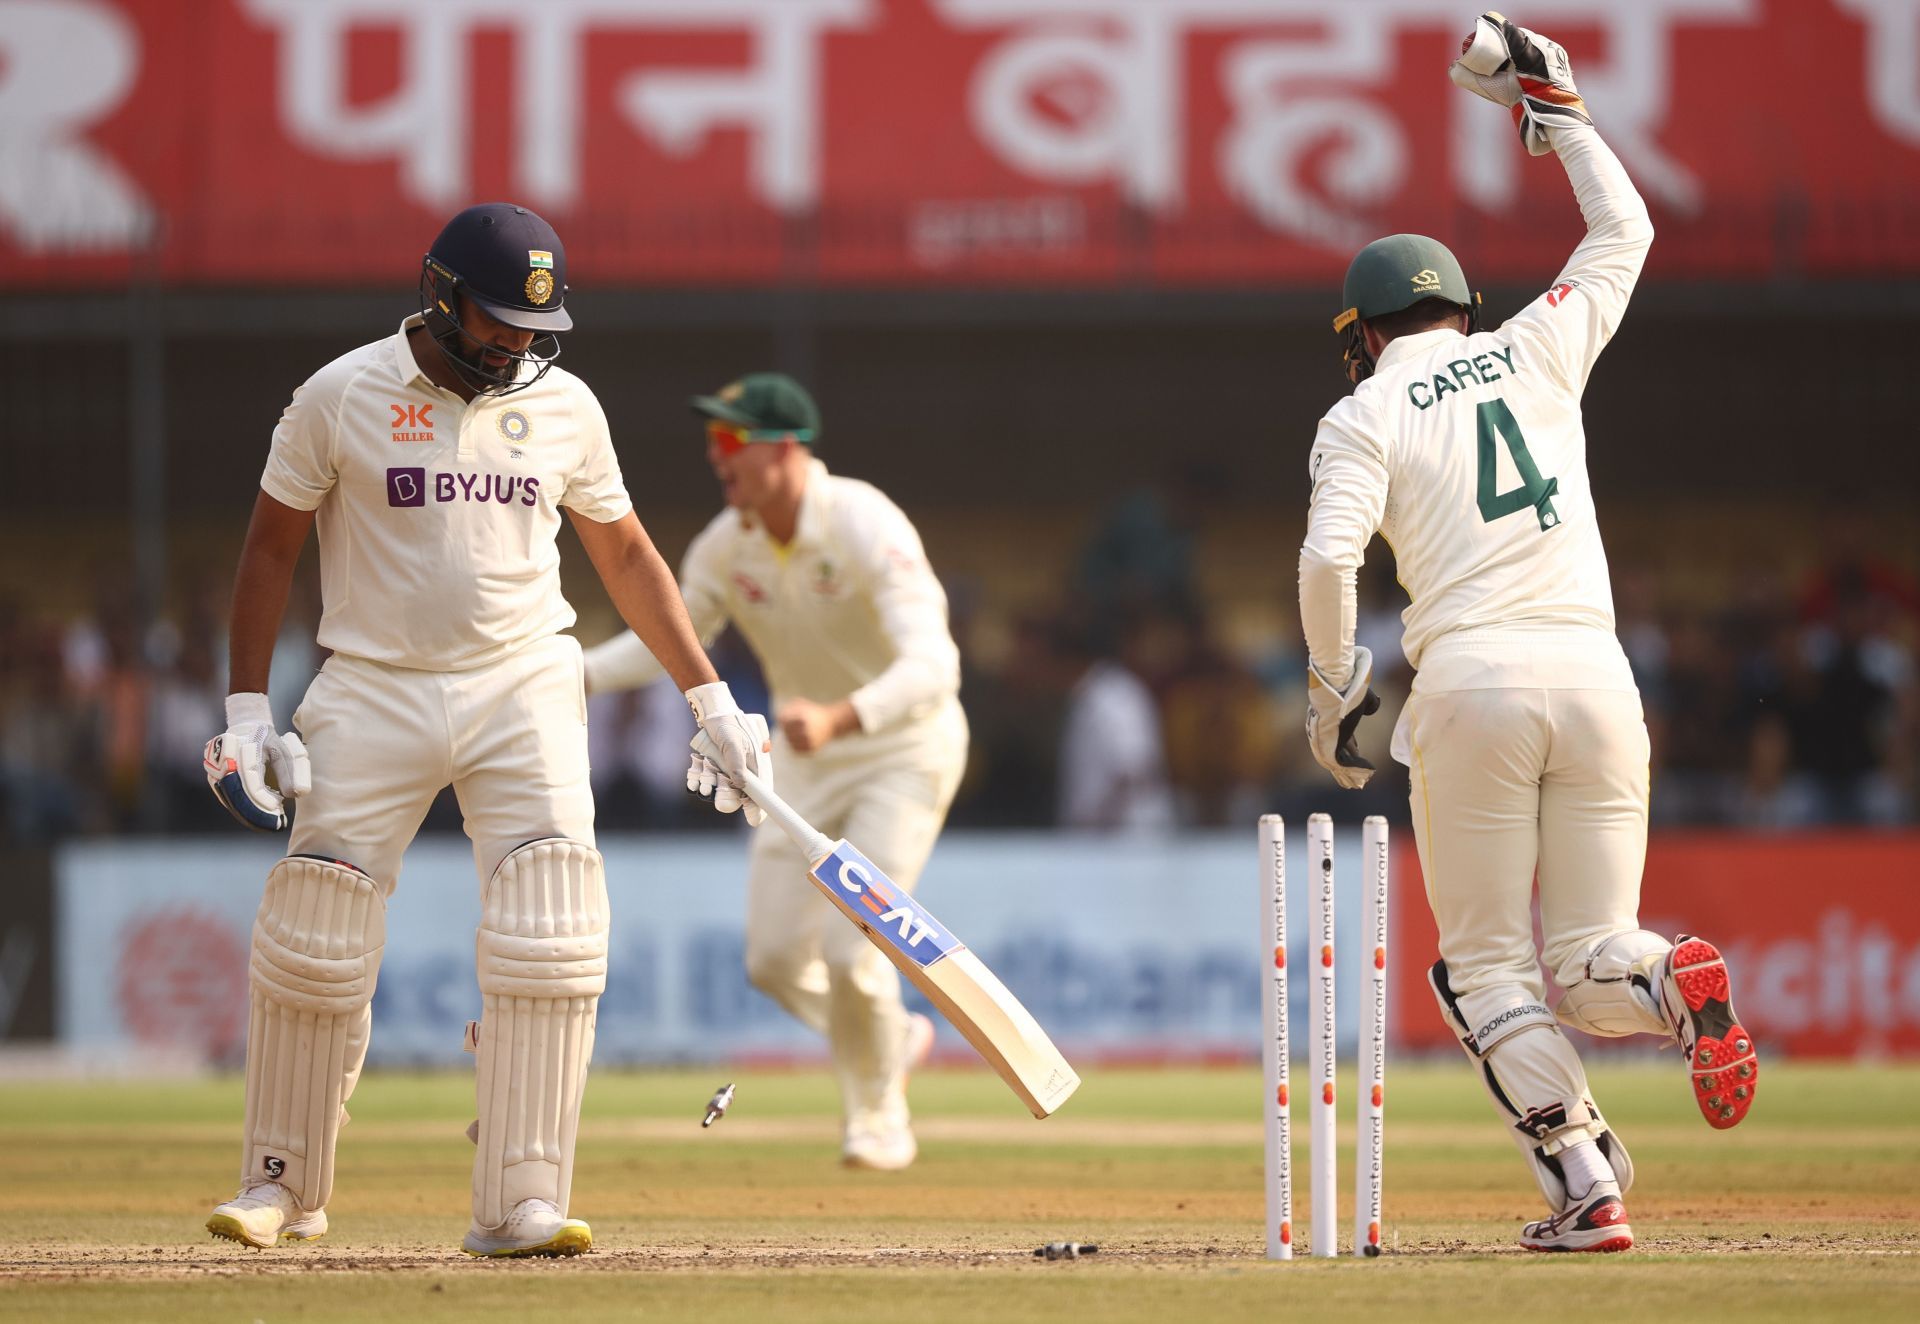 Alex Carey affects a stumping to dismiss Rohit Sharma. (Credits: Getty)